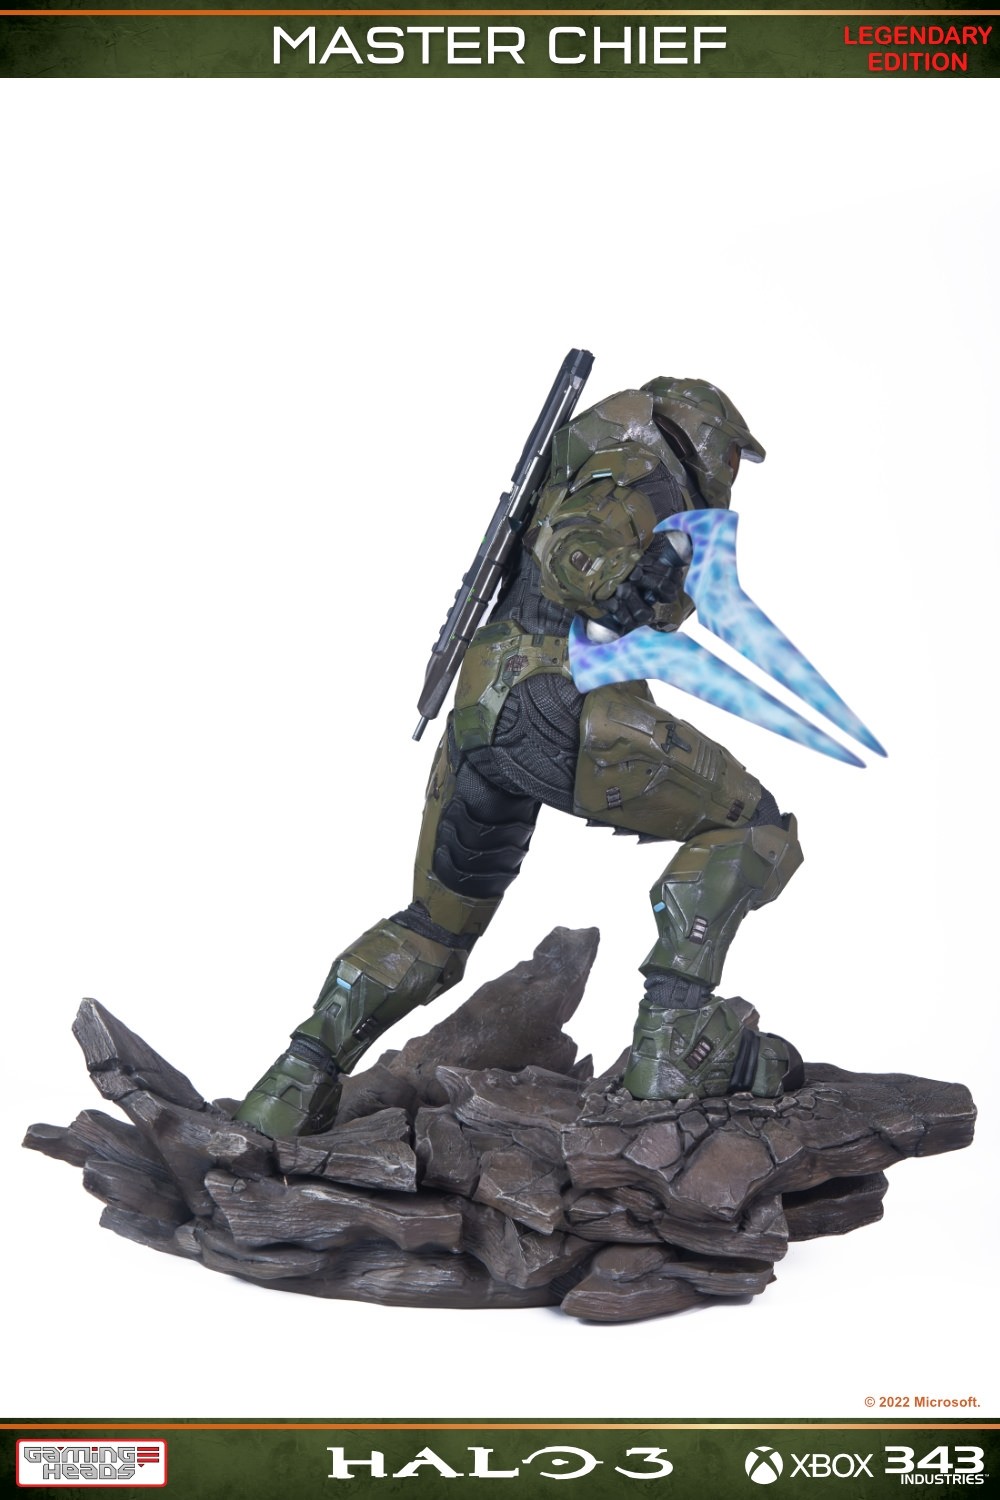 Halo 3: Master Chief (Legendary edition) statue | Gaming Heads